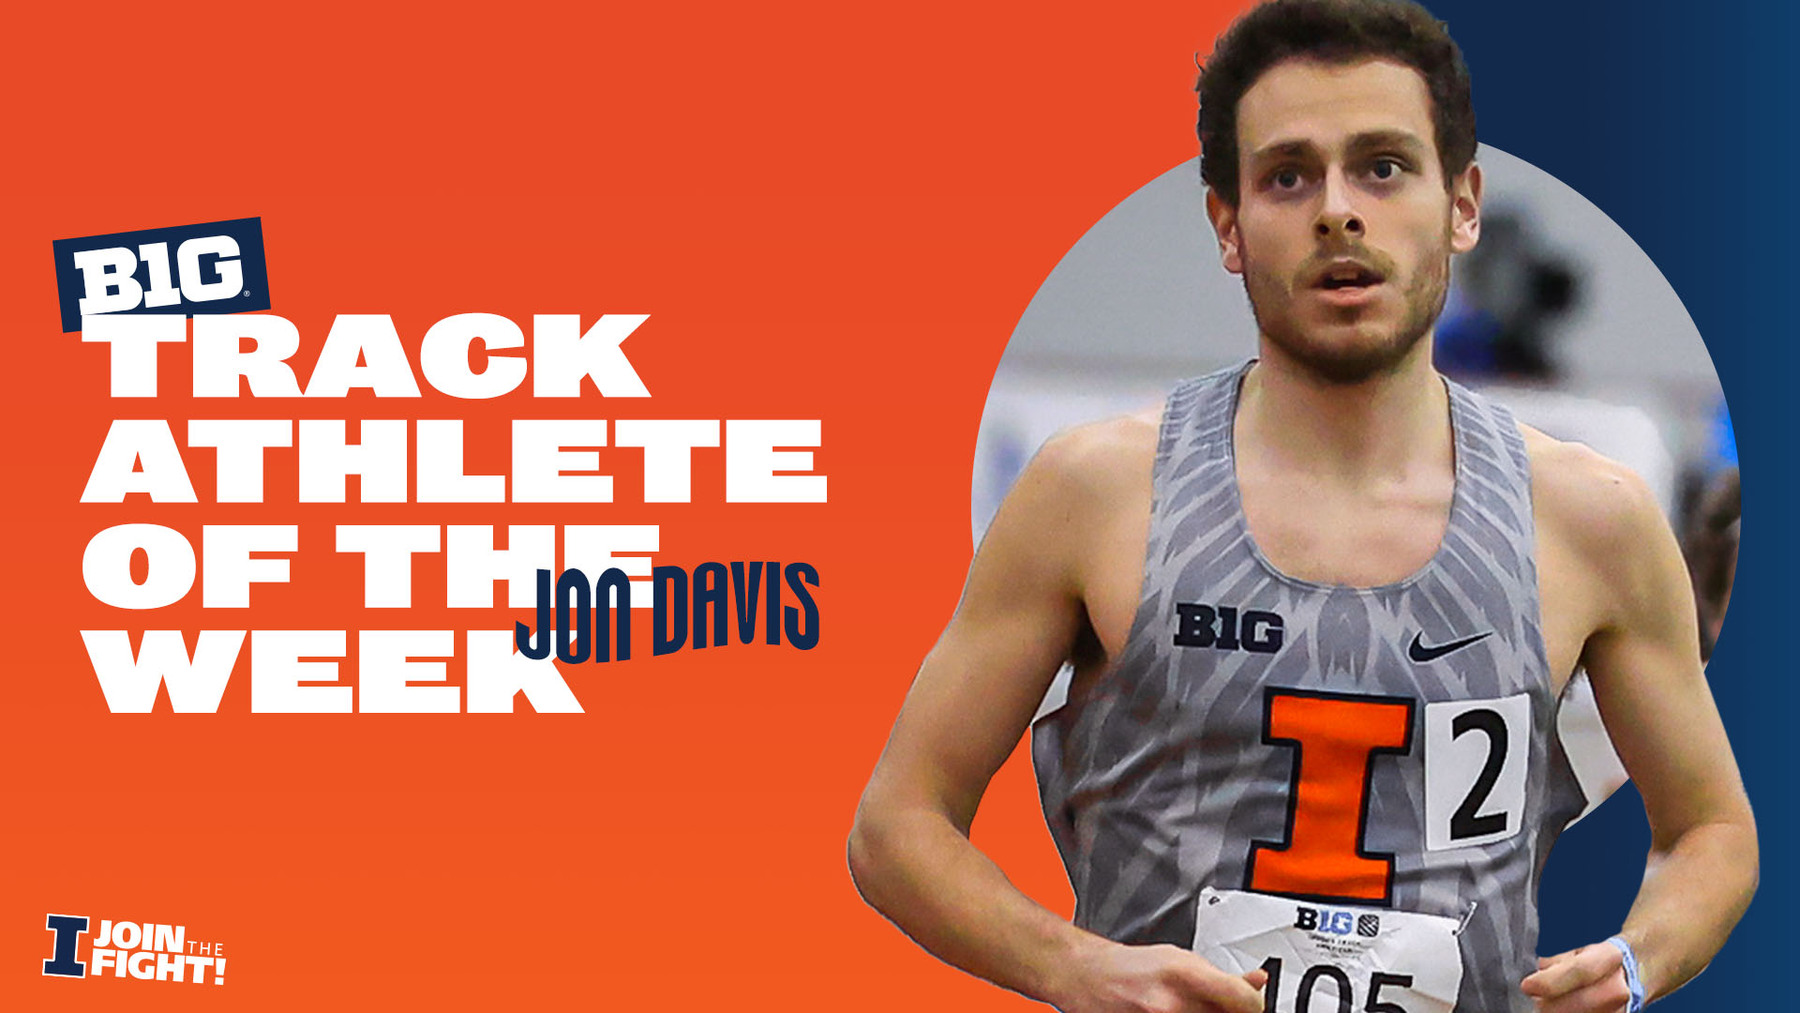 image of Jon Davis running with graphic congratulating him on Athlete of the Week honors